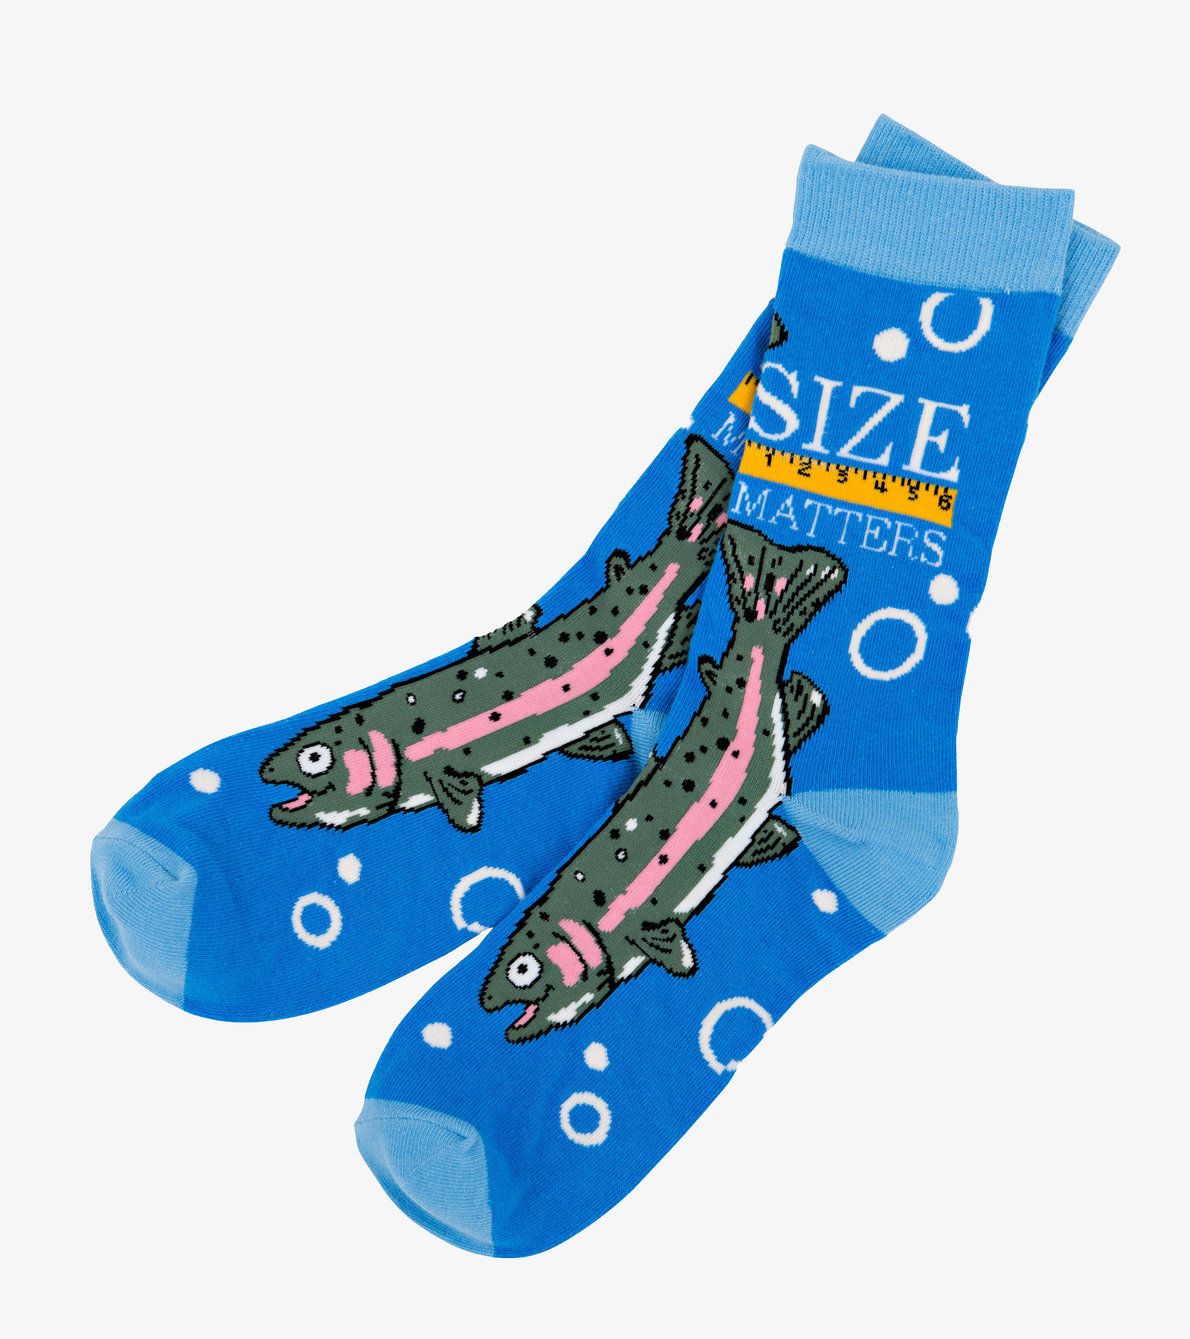 View larger image of Size Matters Men's Crew Socks